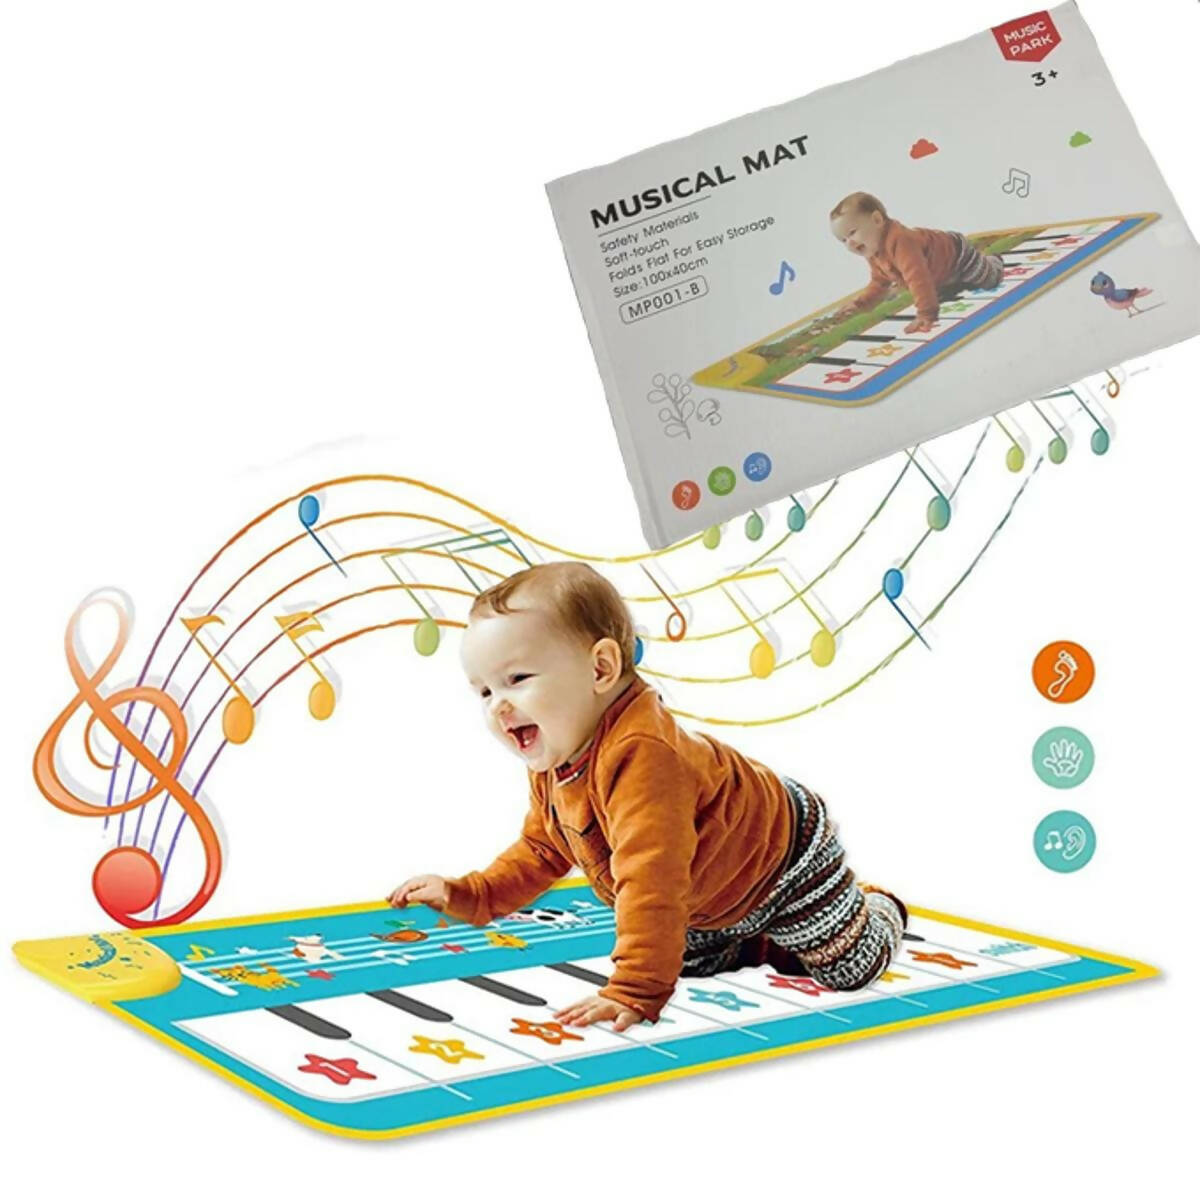 Children's Music Piano Pad, Music Pad Keyboard With 8 Kinds Of Animal Sounds